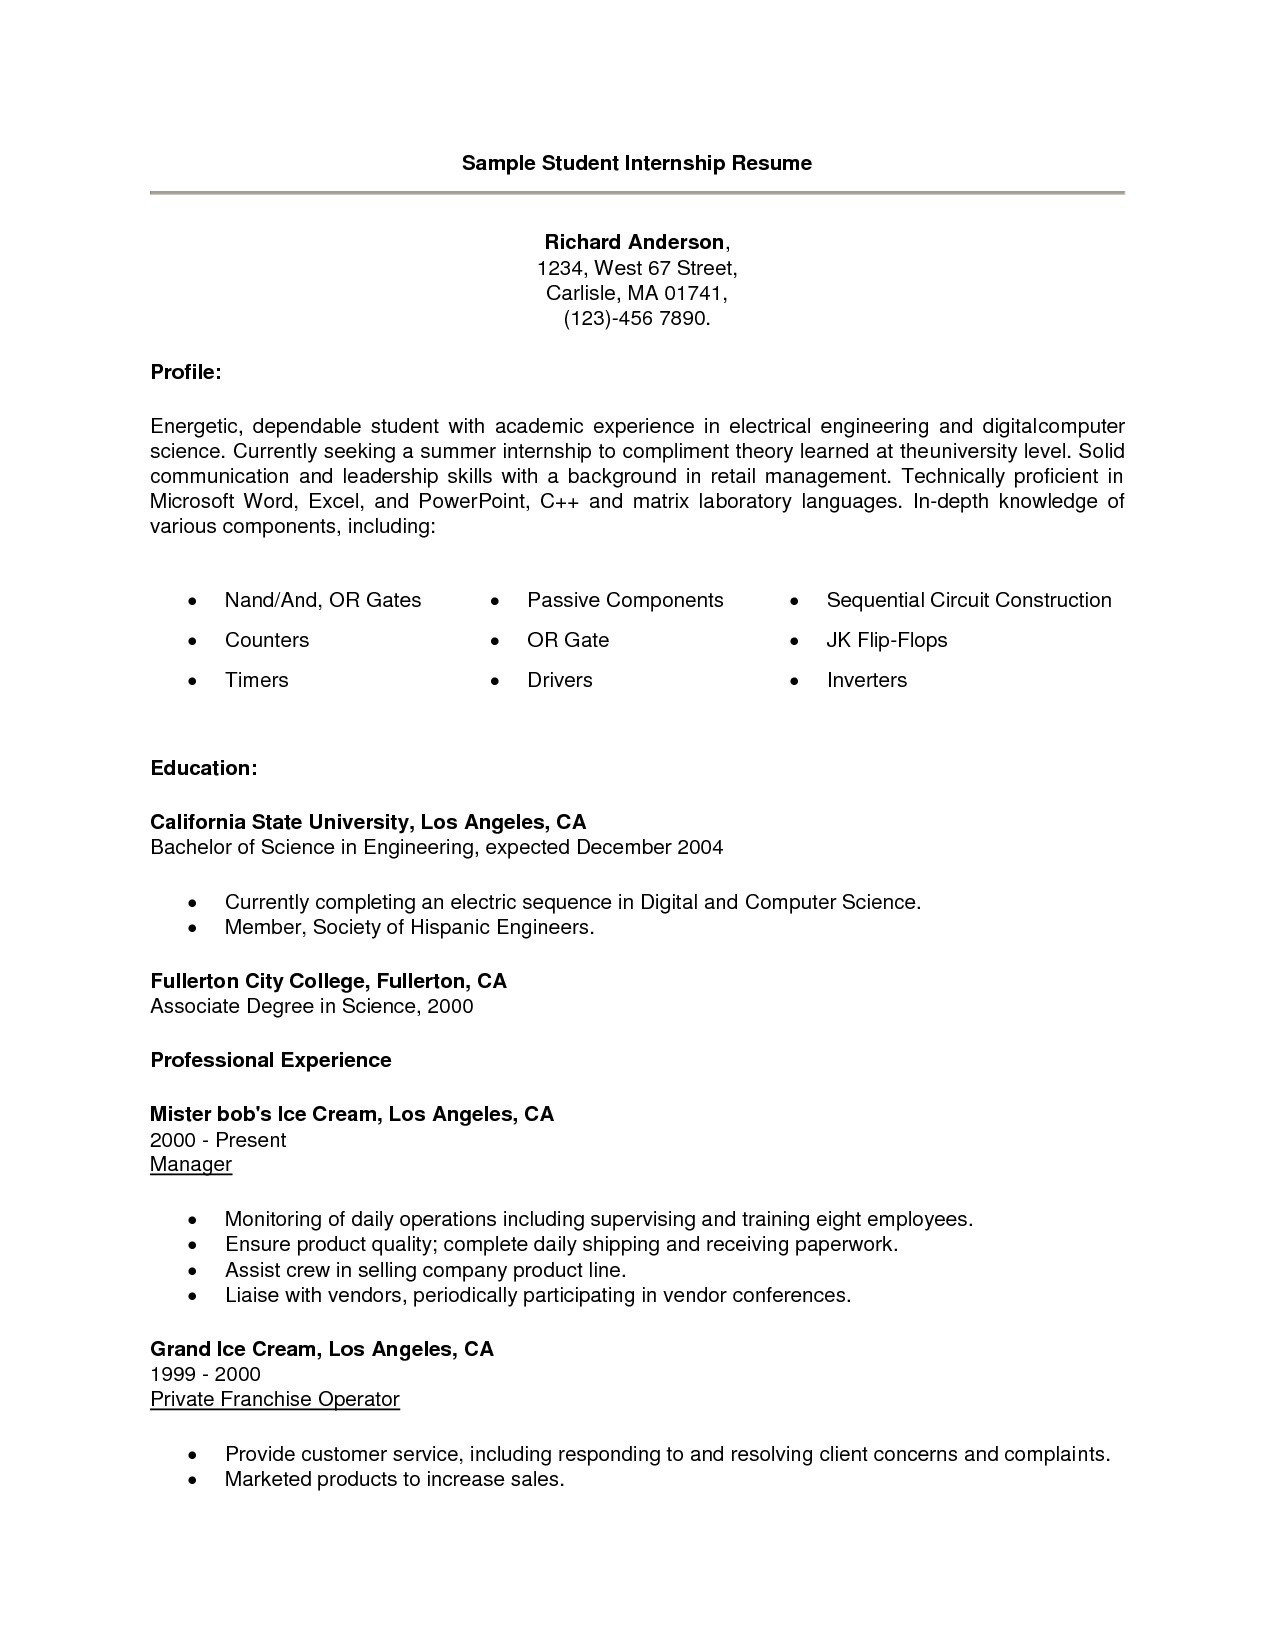 Student Resume Template Resume Outline For College Students Examples College Student Resume